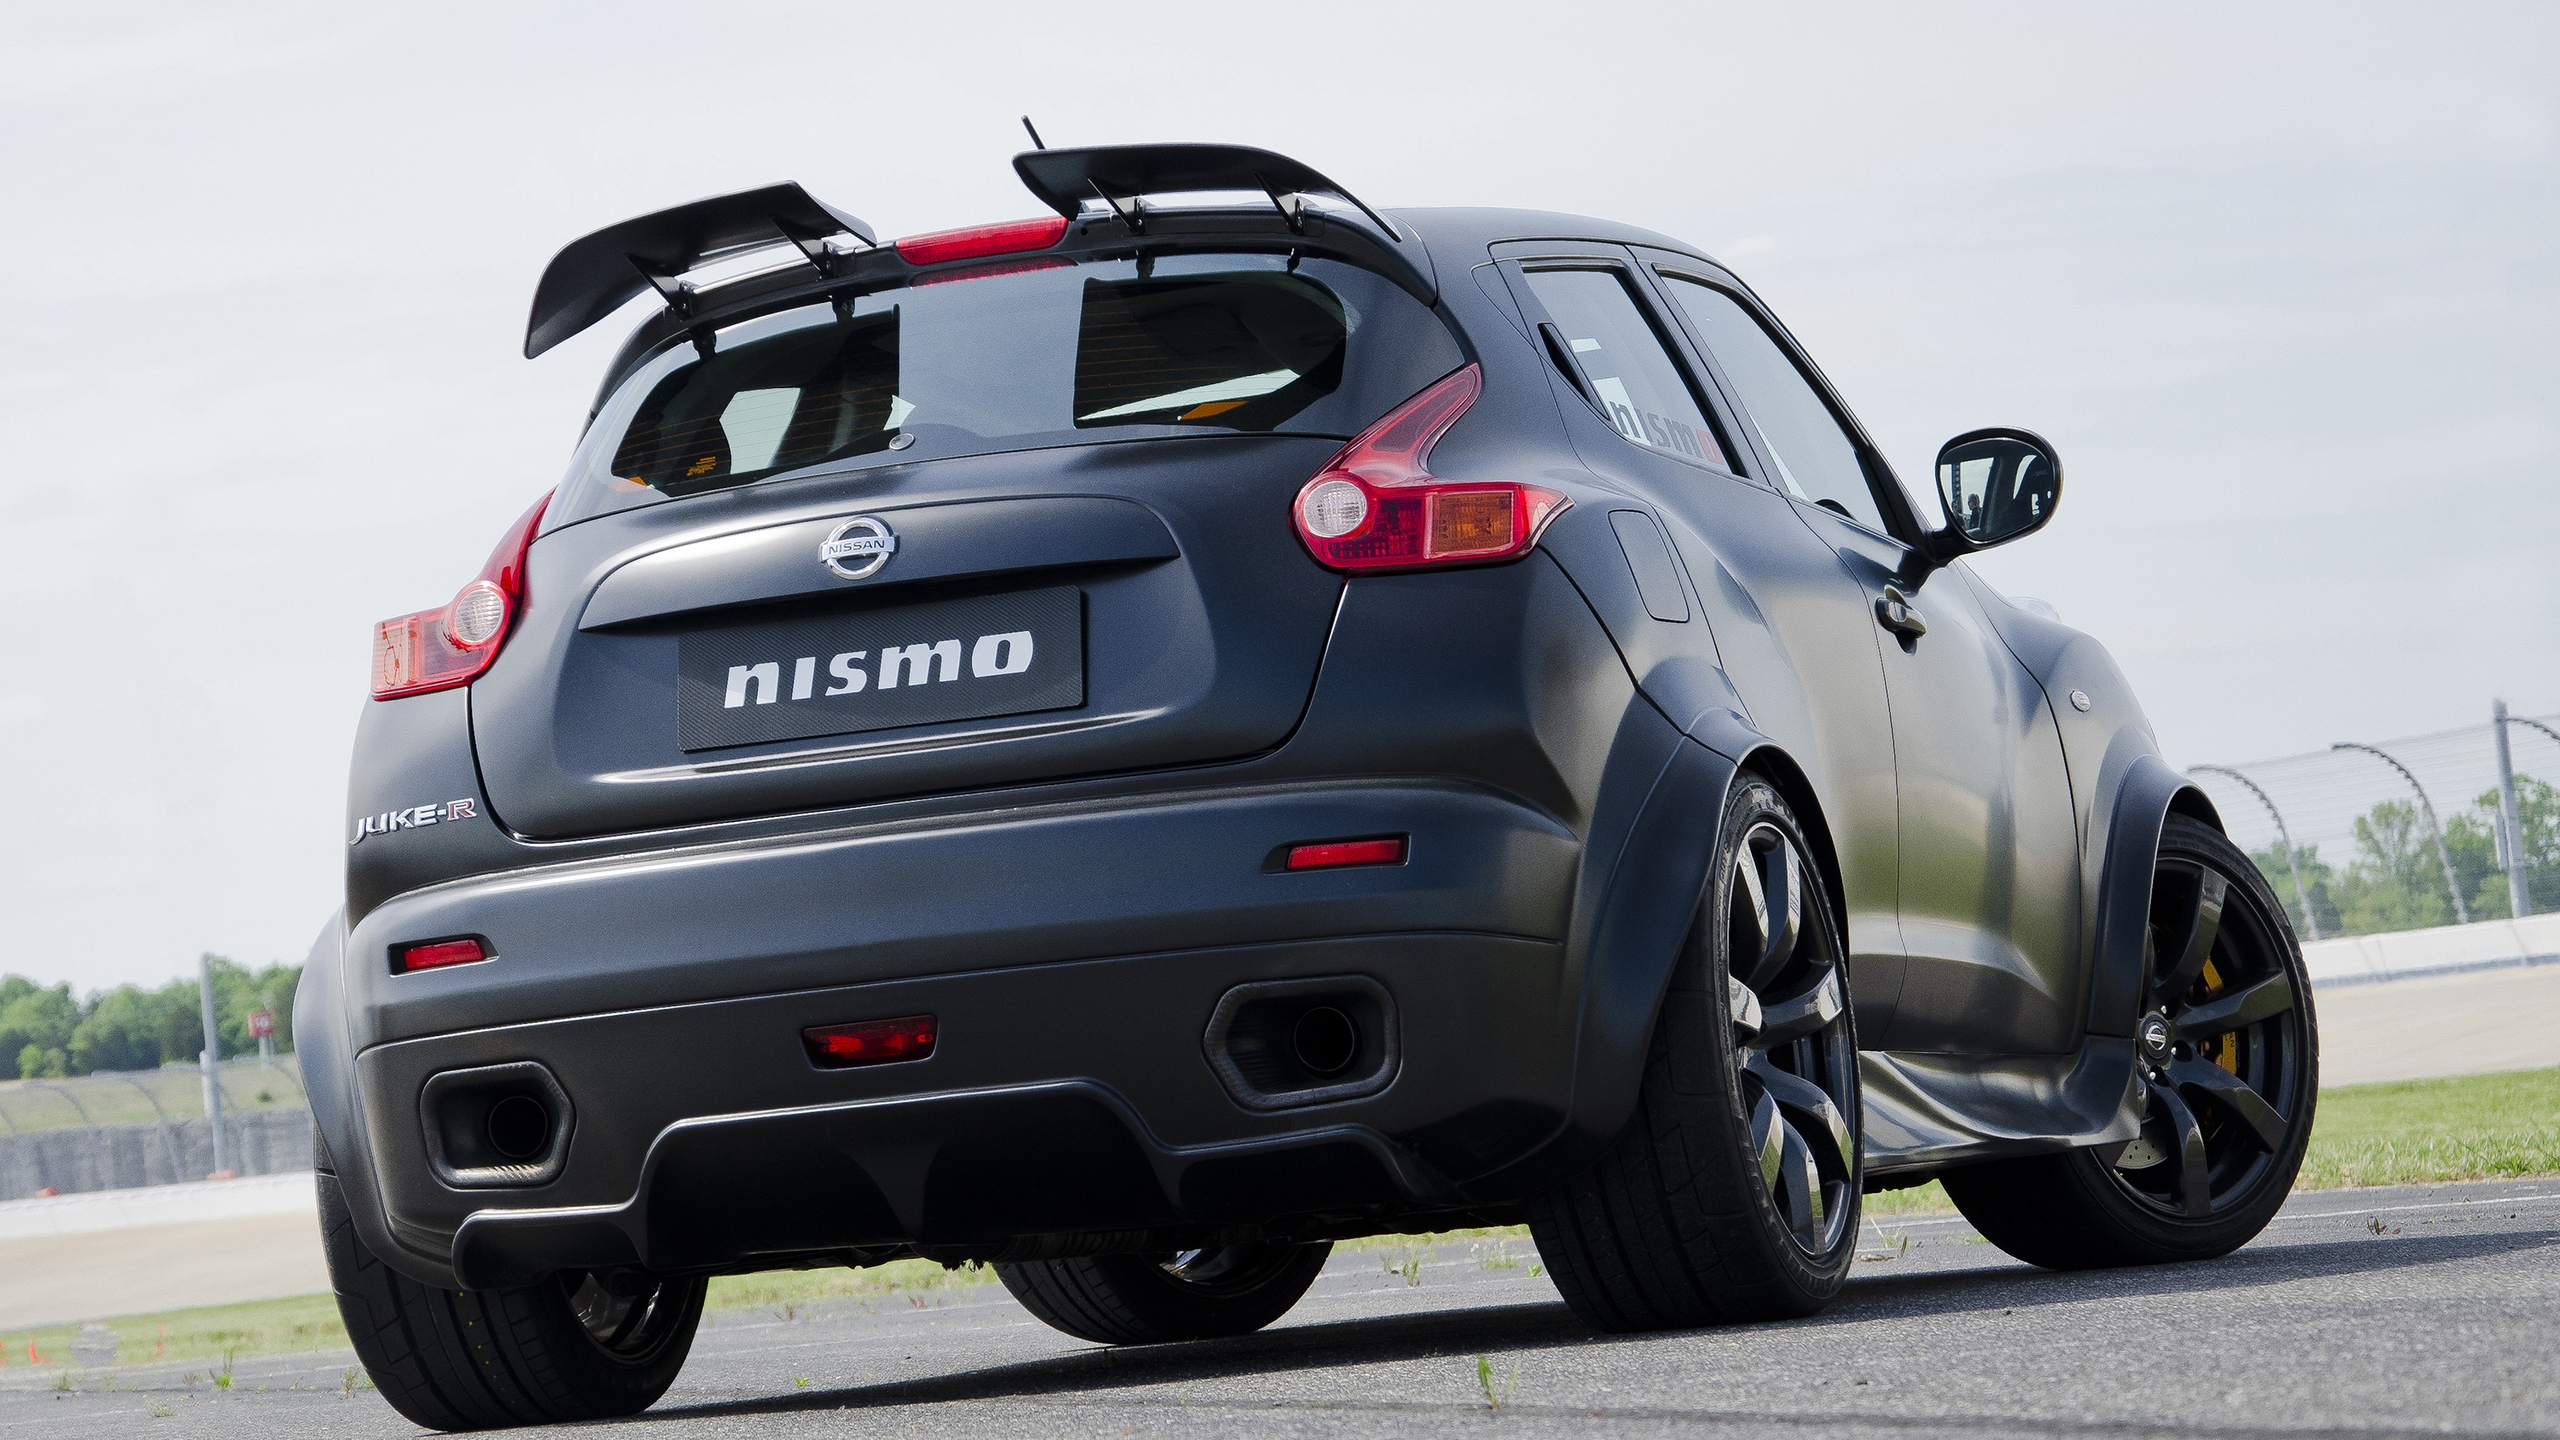 Nissan Juke R Nismo Back View for 2560x1440 HDTV resolution